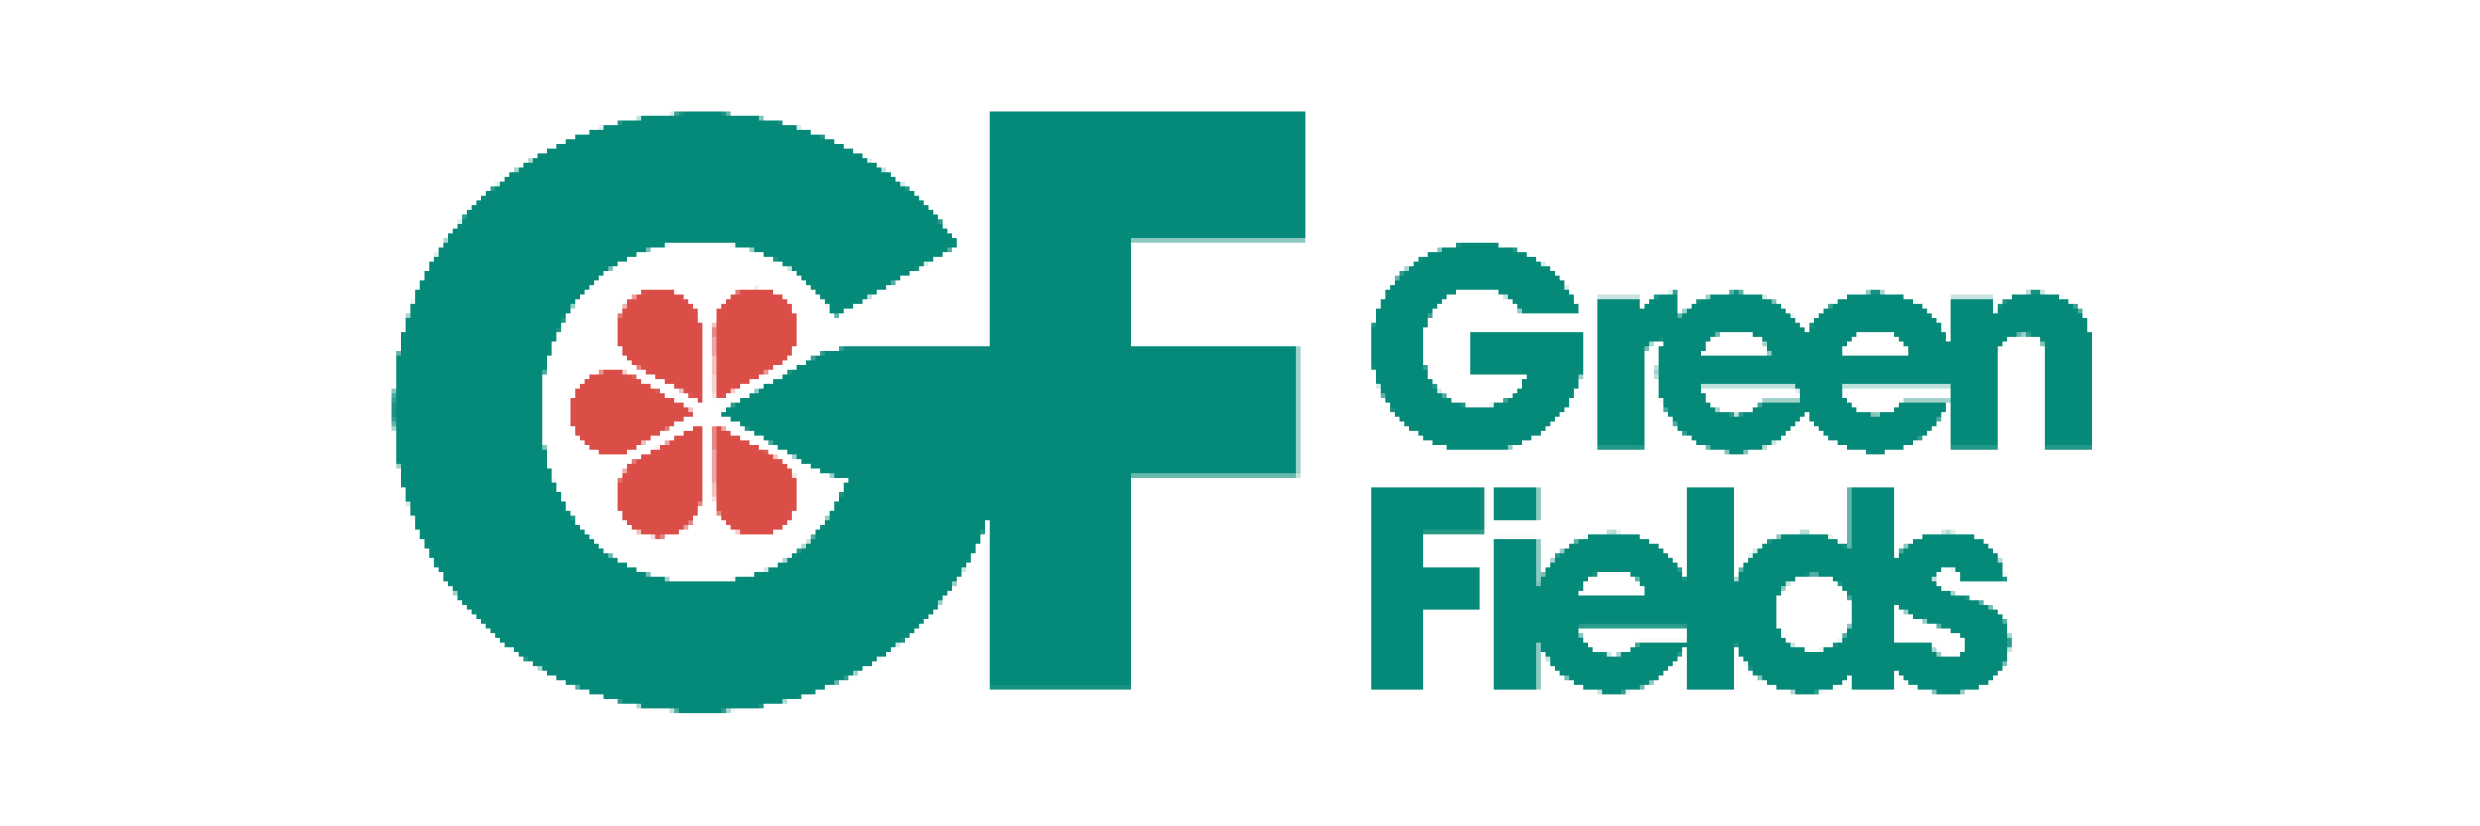 Greenfields - daily operational forecast by day for 12 weeks